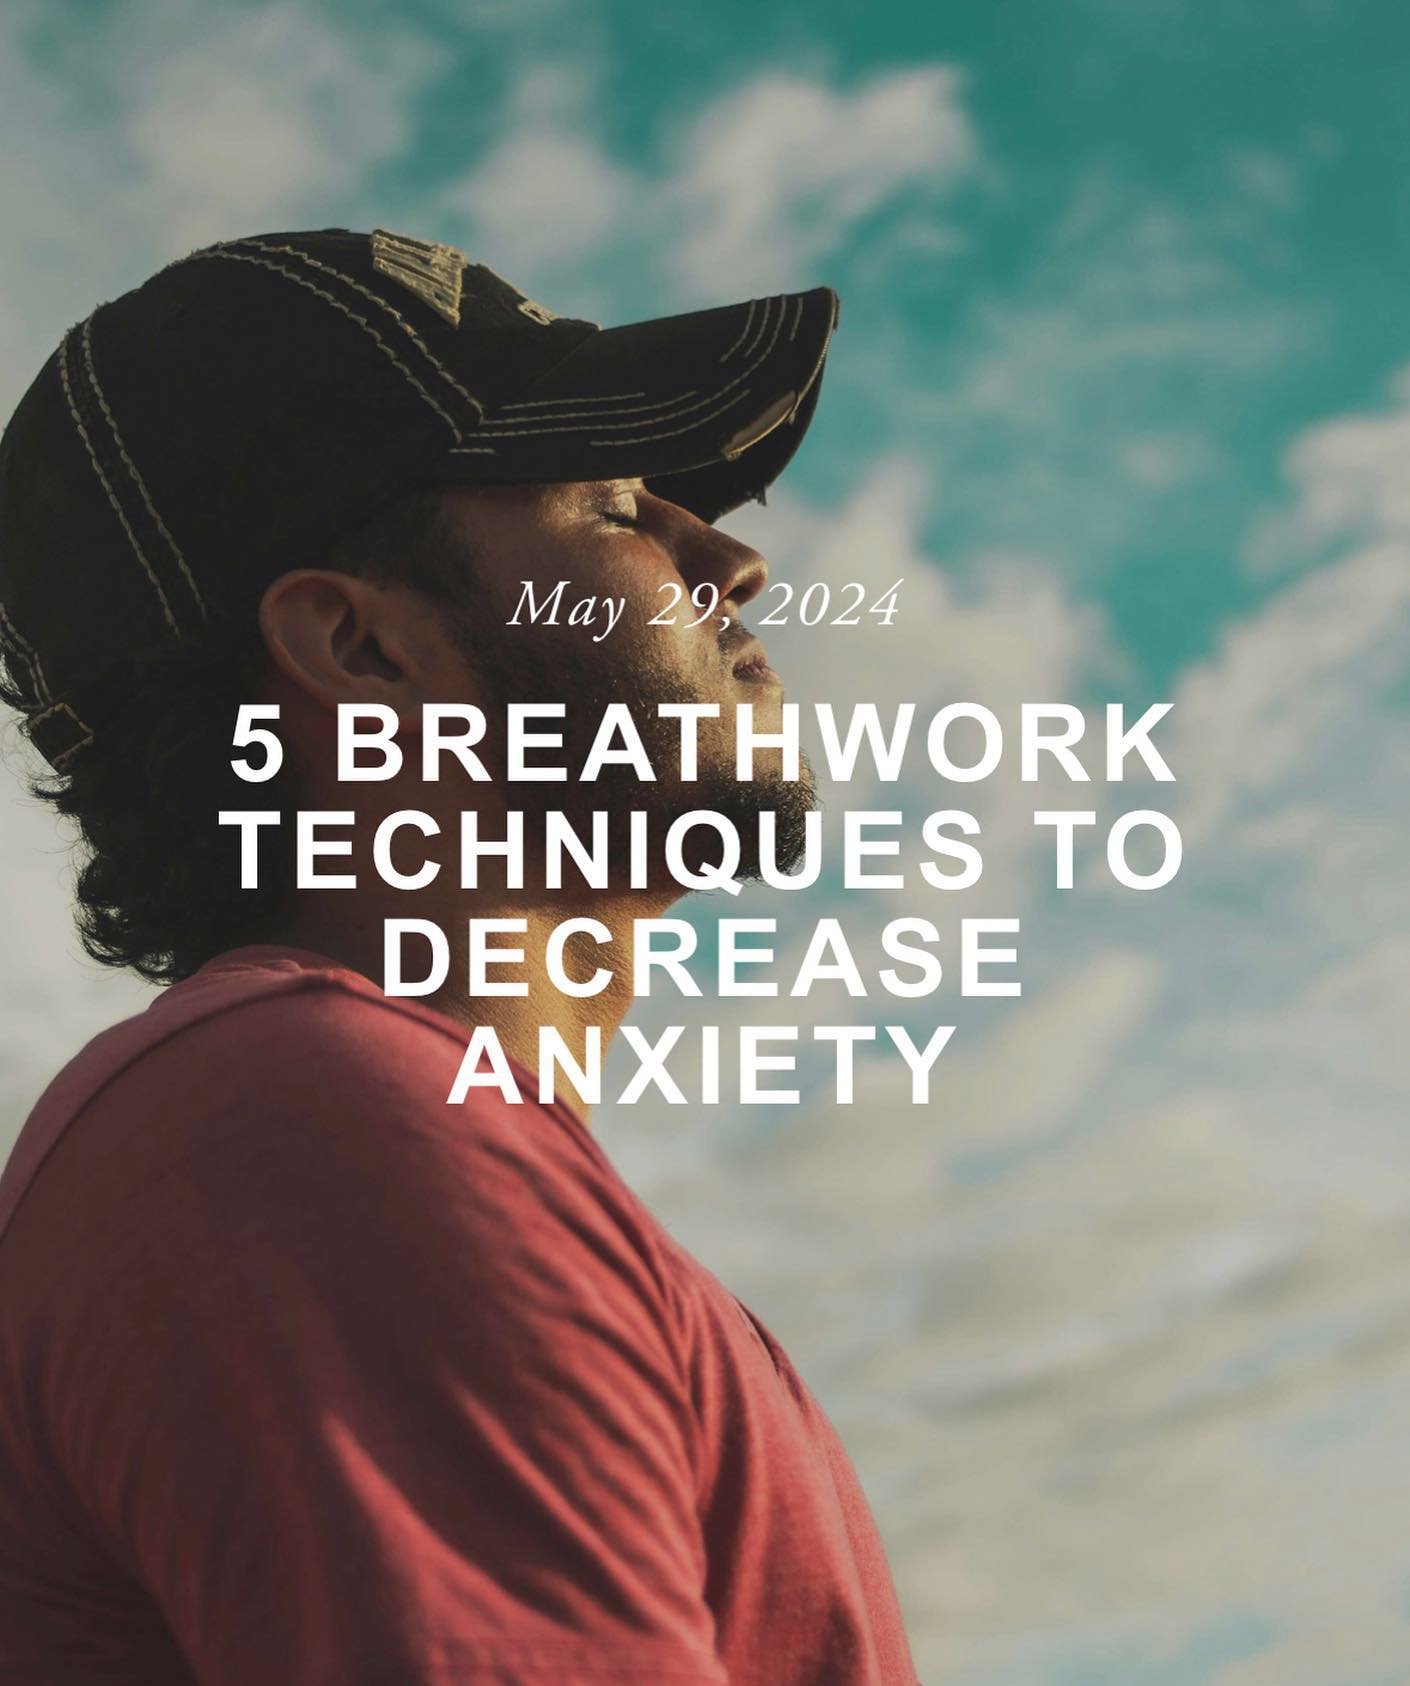 If you want to learn breathwork exercises for anxiety, this blog is for you!

&ldquo;Breath patterns have a direct affect on one&rsquo;s anxiety levels. Feeling anxious is overwhelming. Any sign of anxiety, whether cognitive or emotional, is uncomfor